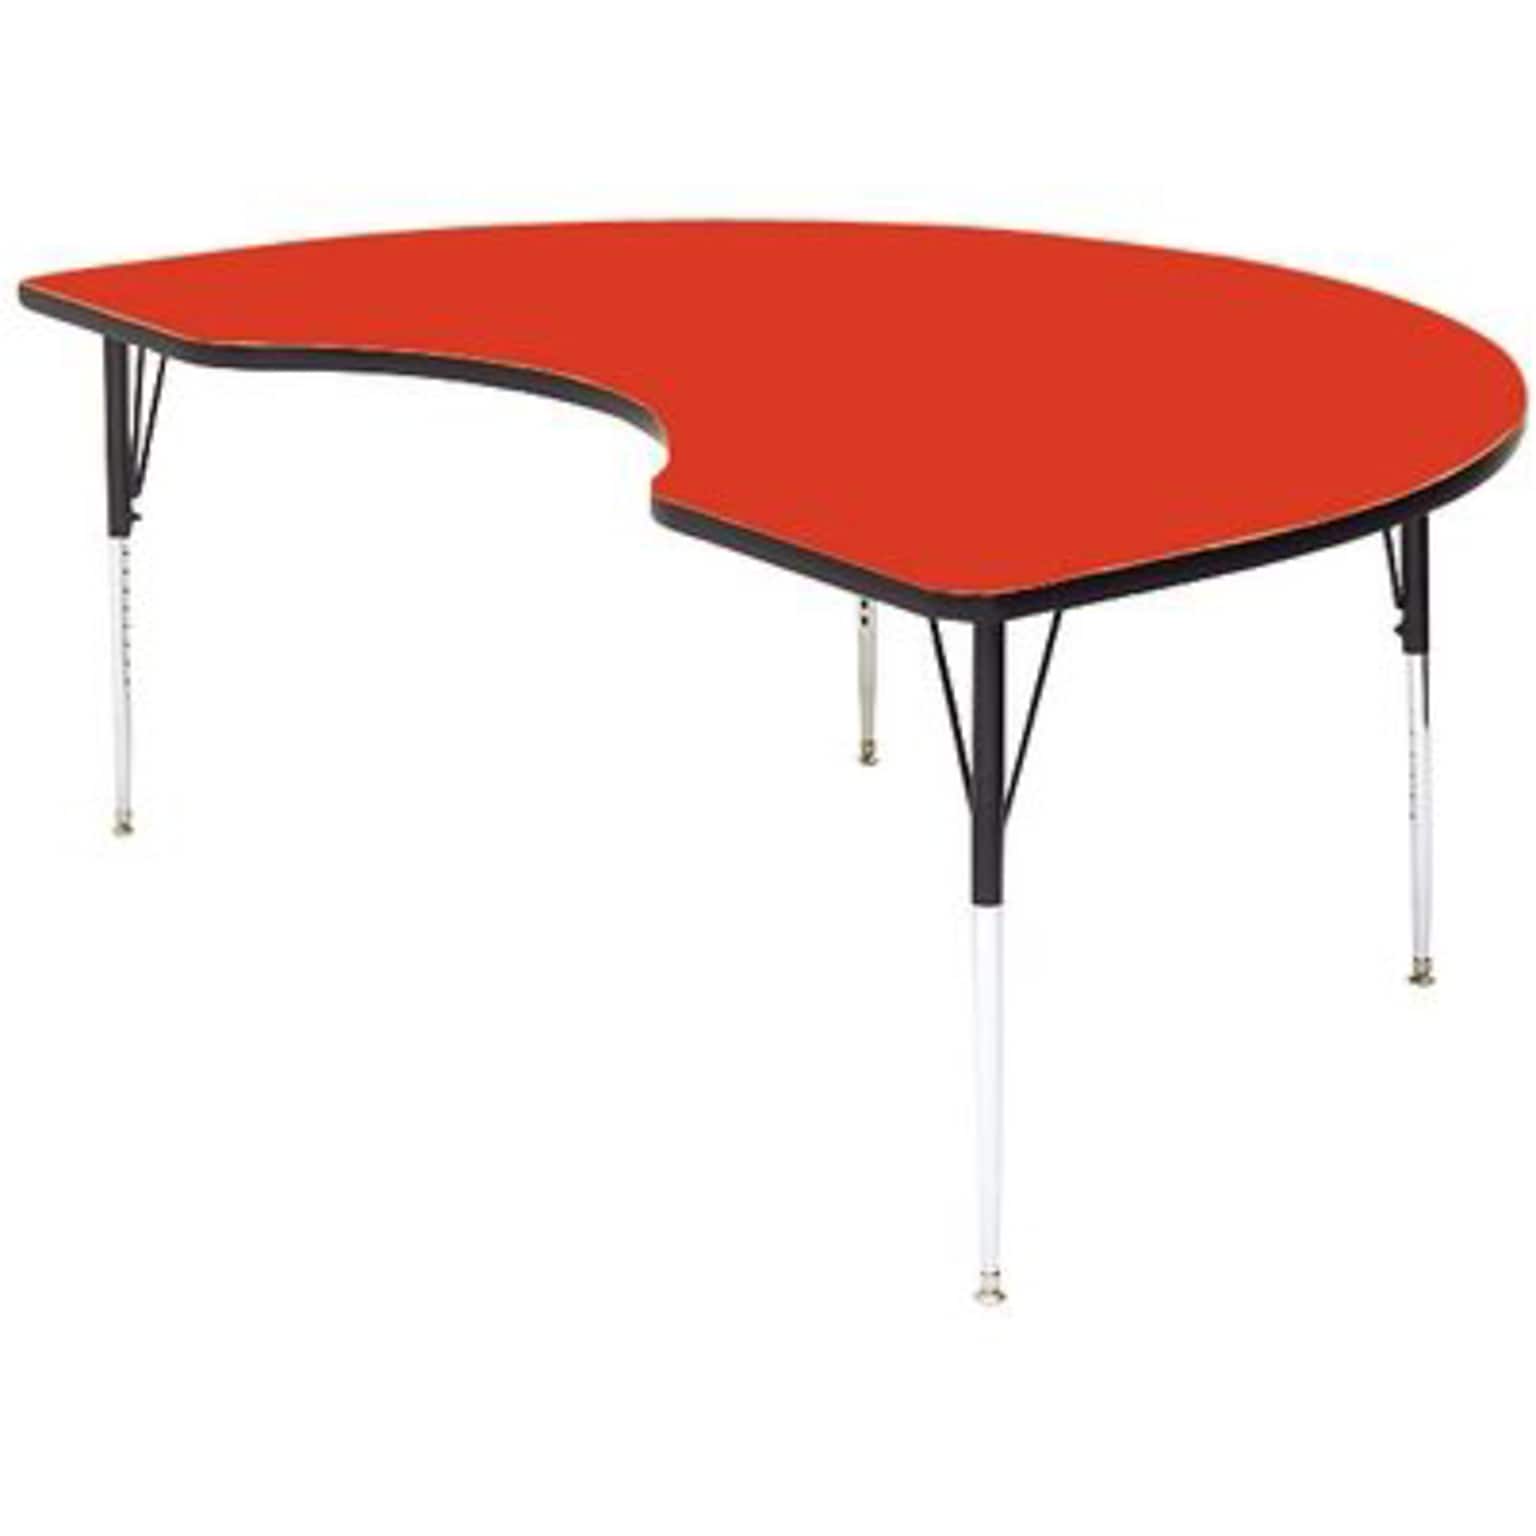 Correll® 48D x 72L Kidney Shaped Heavy Duty Activity Table; Red High Pressure Laminate Top